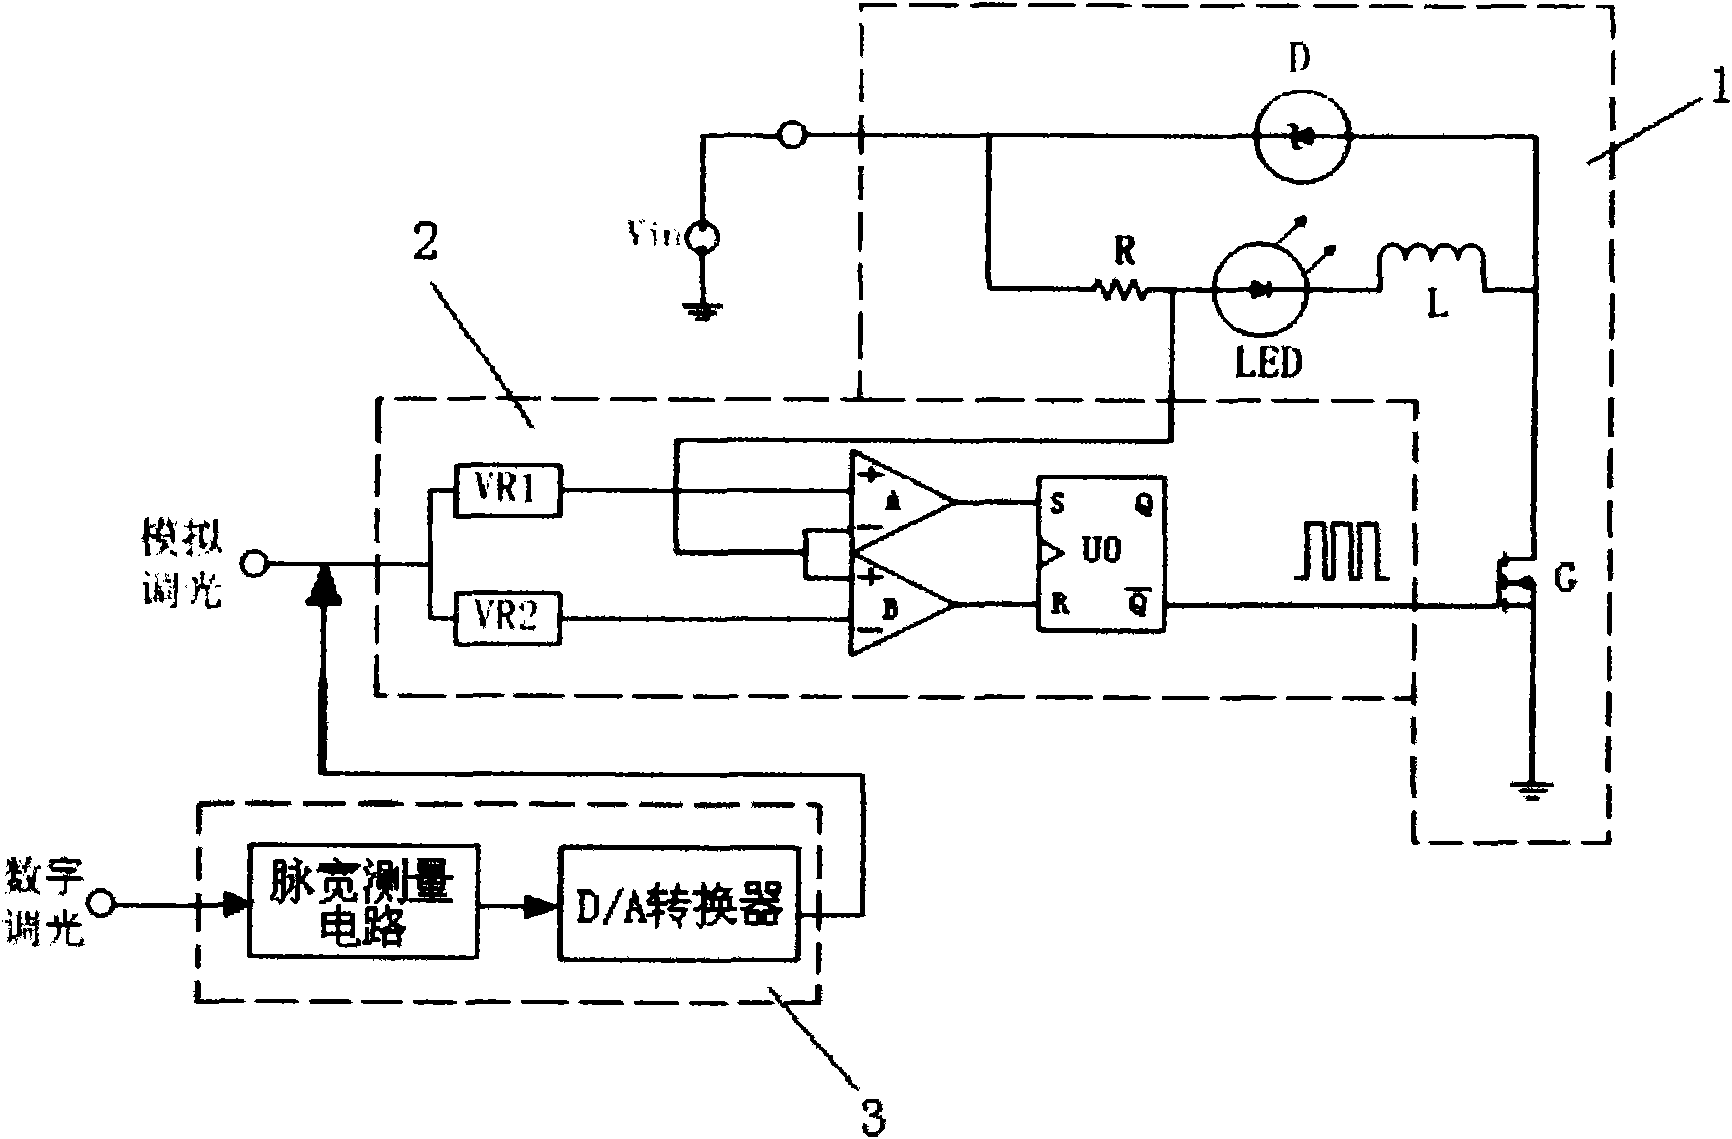 LED constant current drive circuit with light dimming function